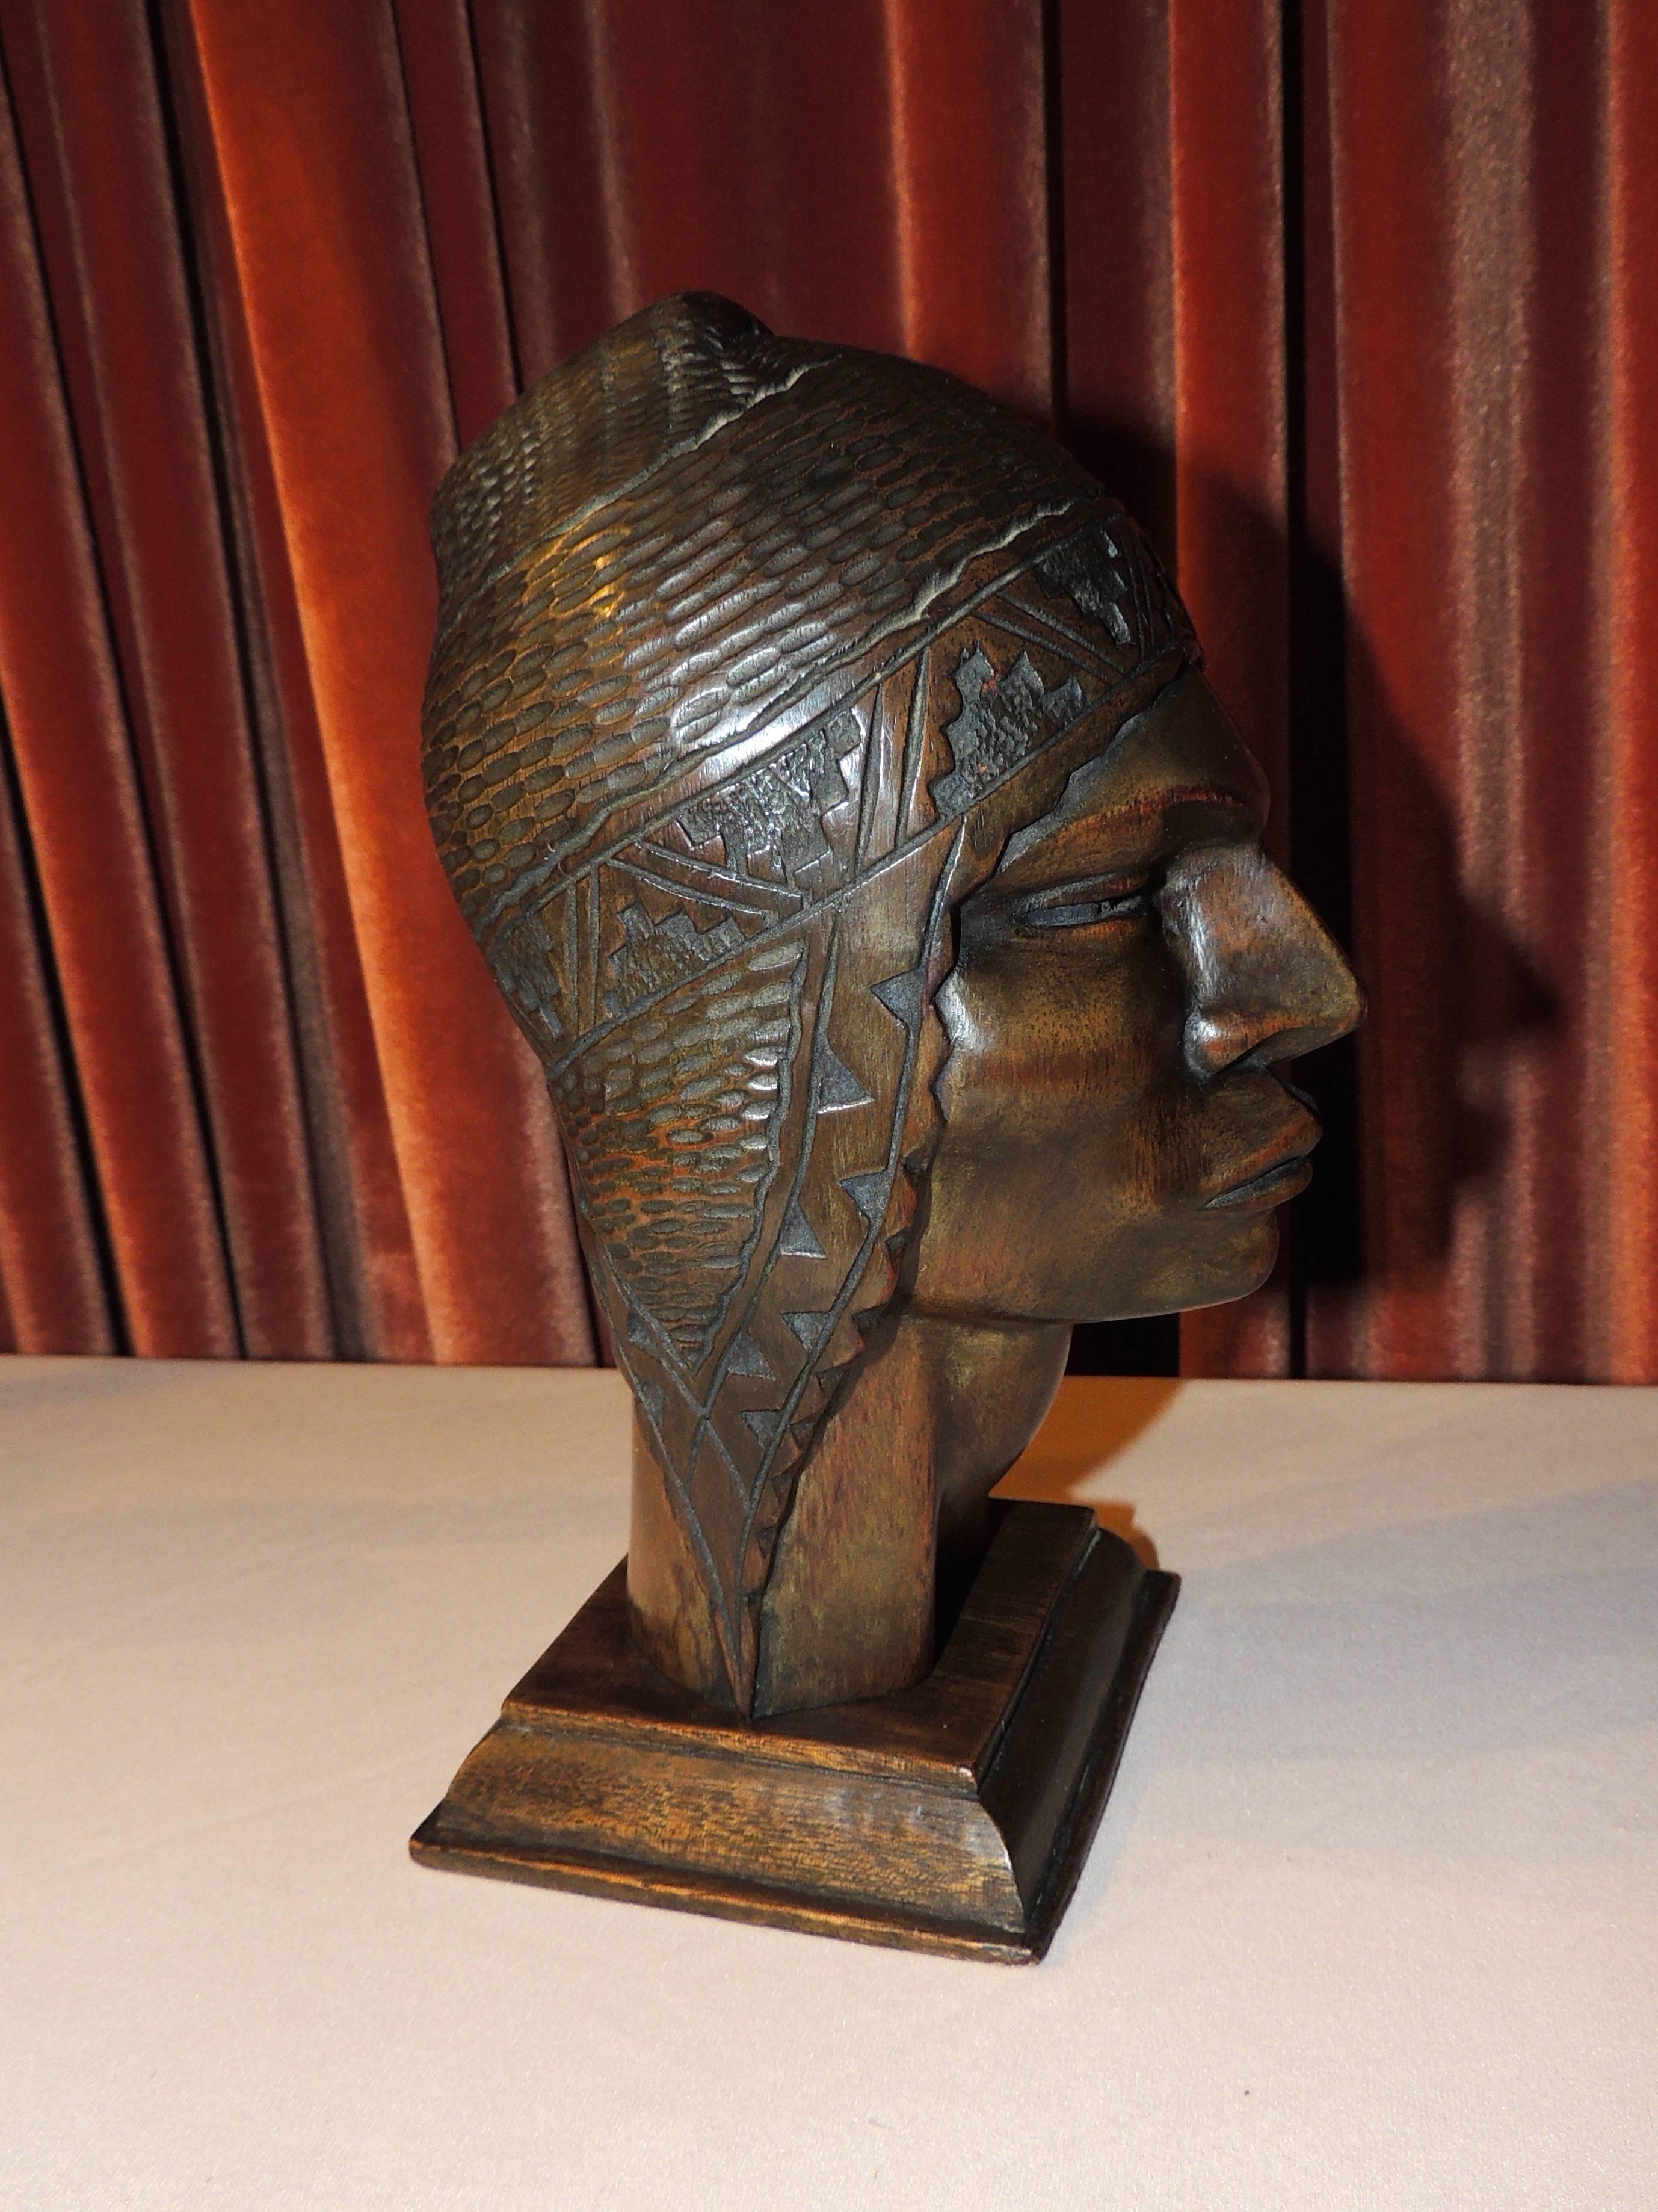 Xotic Indian Art Deco Sculpted Head in Wood by Silva 1